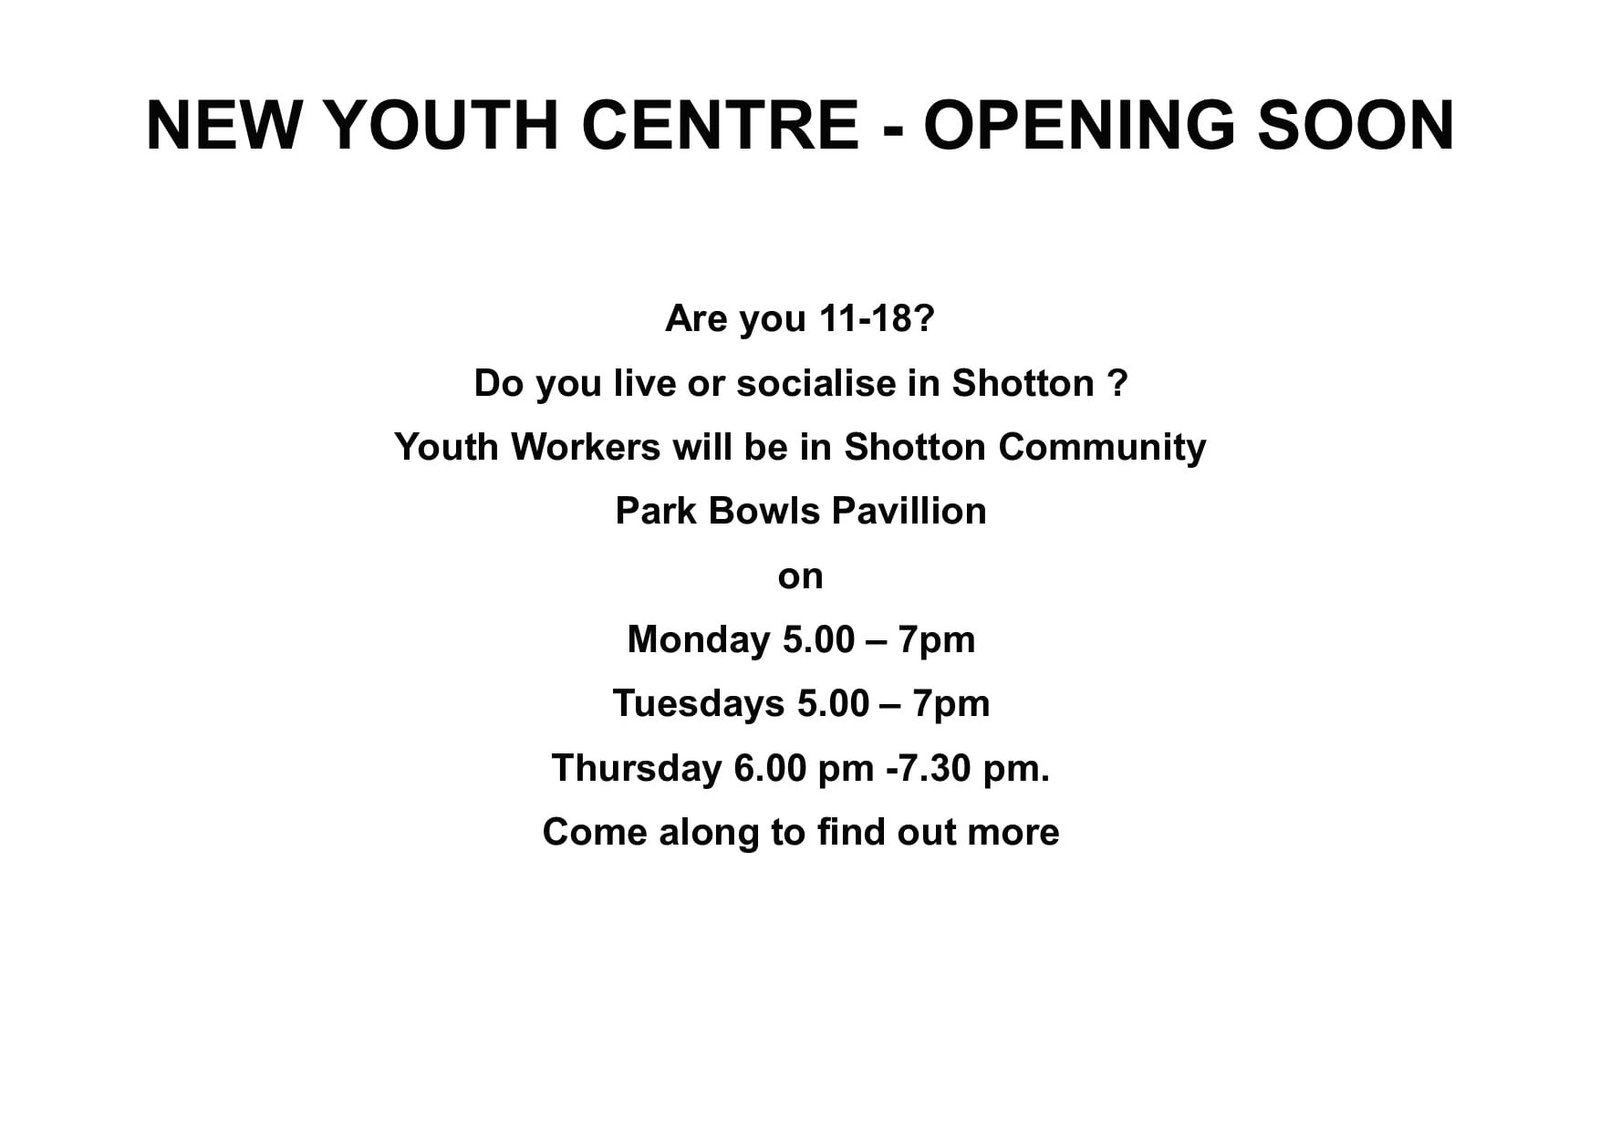 New Youth Centre